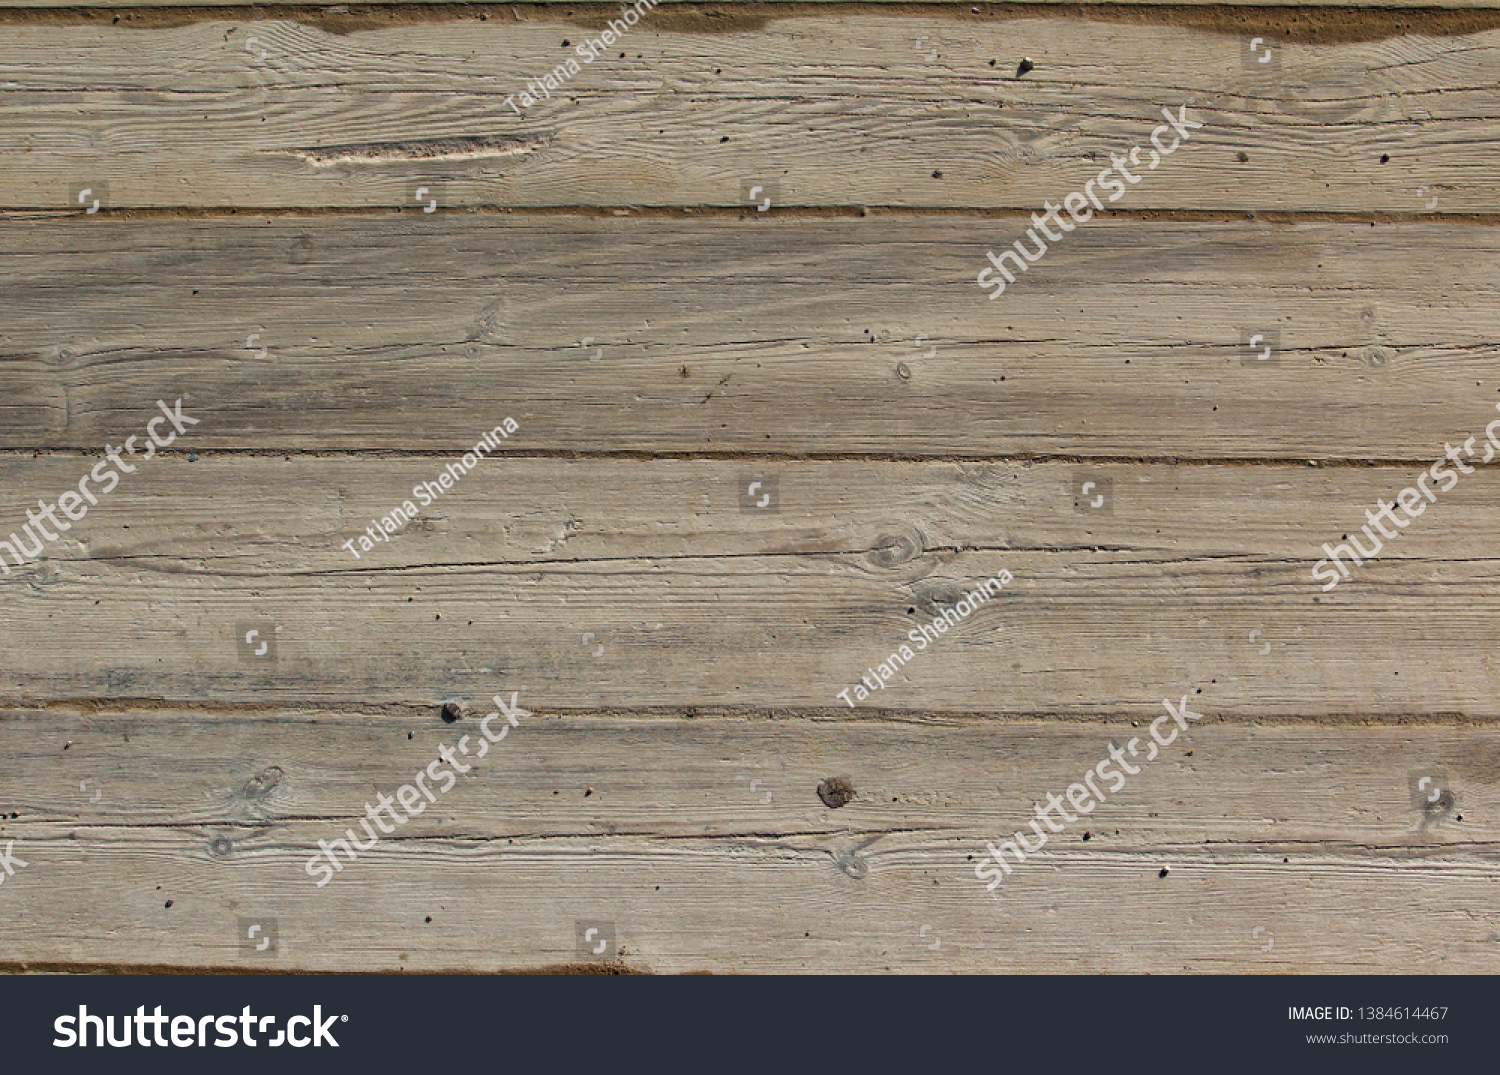 Old hight brown wood panel horizontal pattern, horizontal striped background or backdrop.
Vintage, rustic or retro style. #1384614467